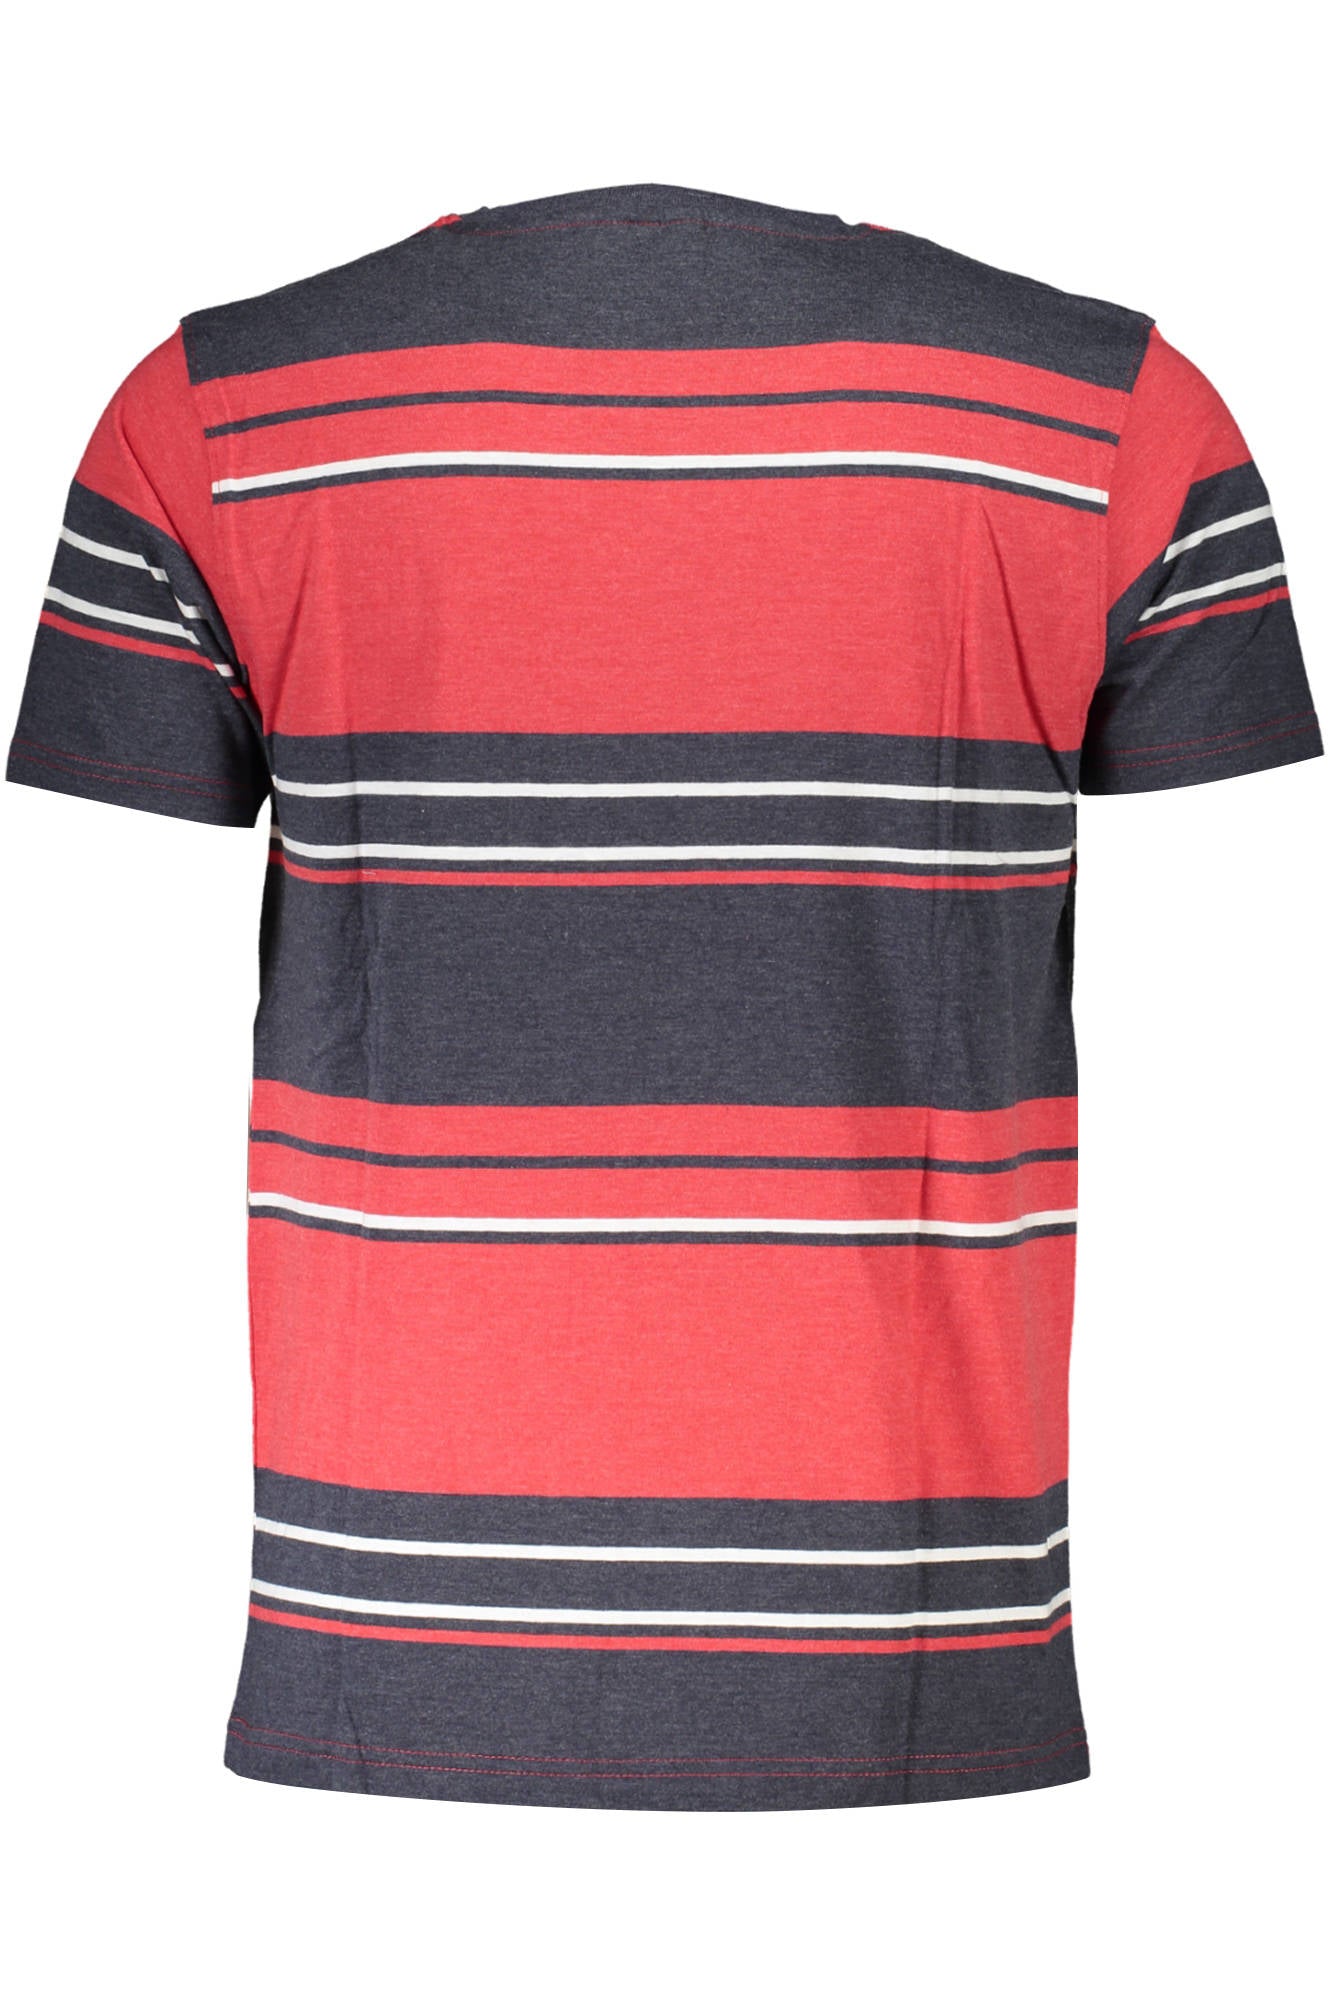 US GRAND POLO T-SHIRT SHORT SLEEVE MAN RED